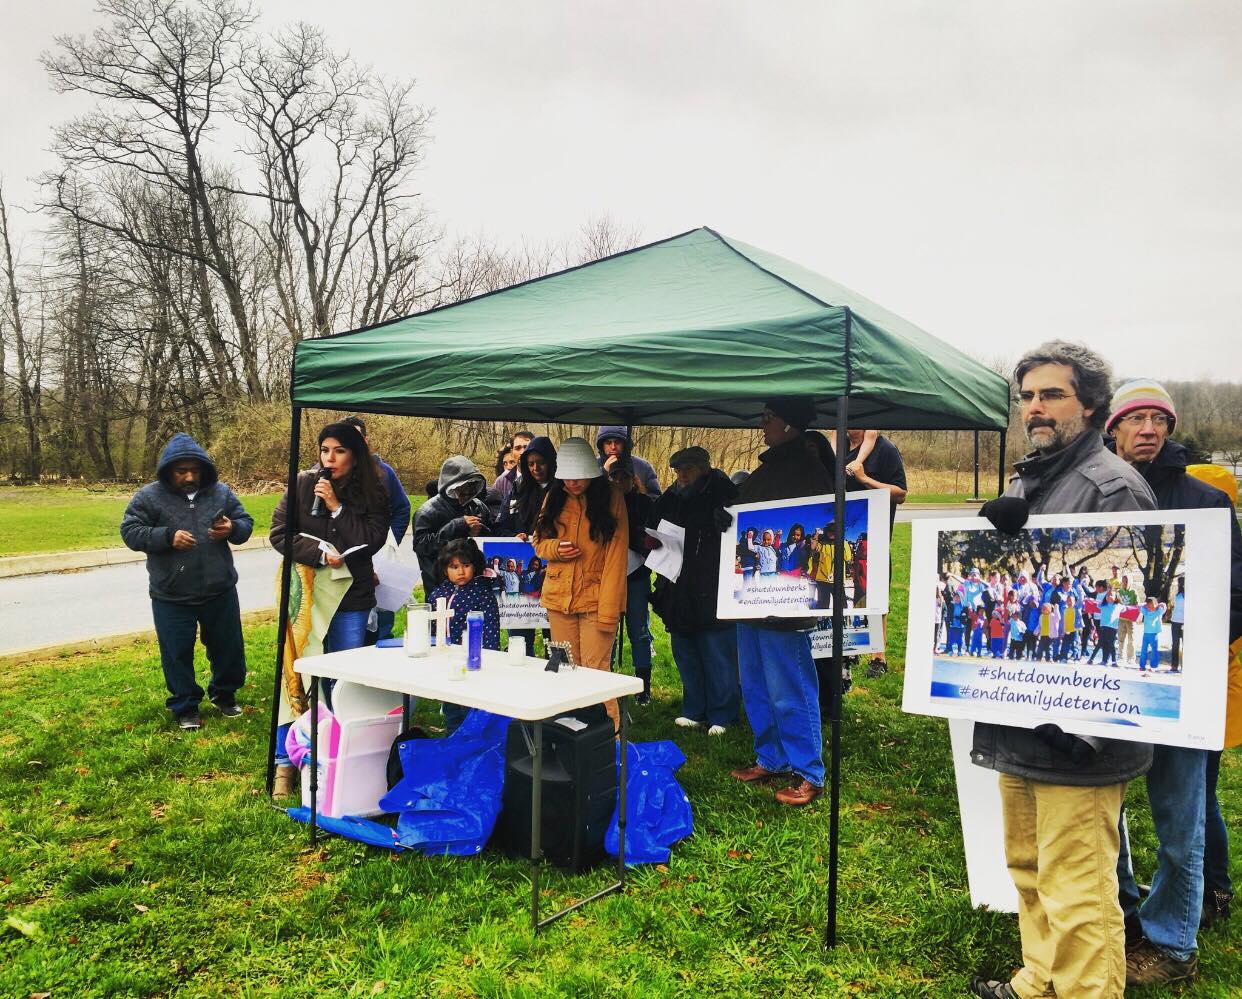 On April 15, a group of protesters held a vigil outside of the Berks County Residential Center calling for the release of families being held there. (Provided by supporters of the Shut Down Berks Coalition)